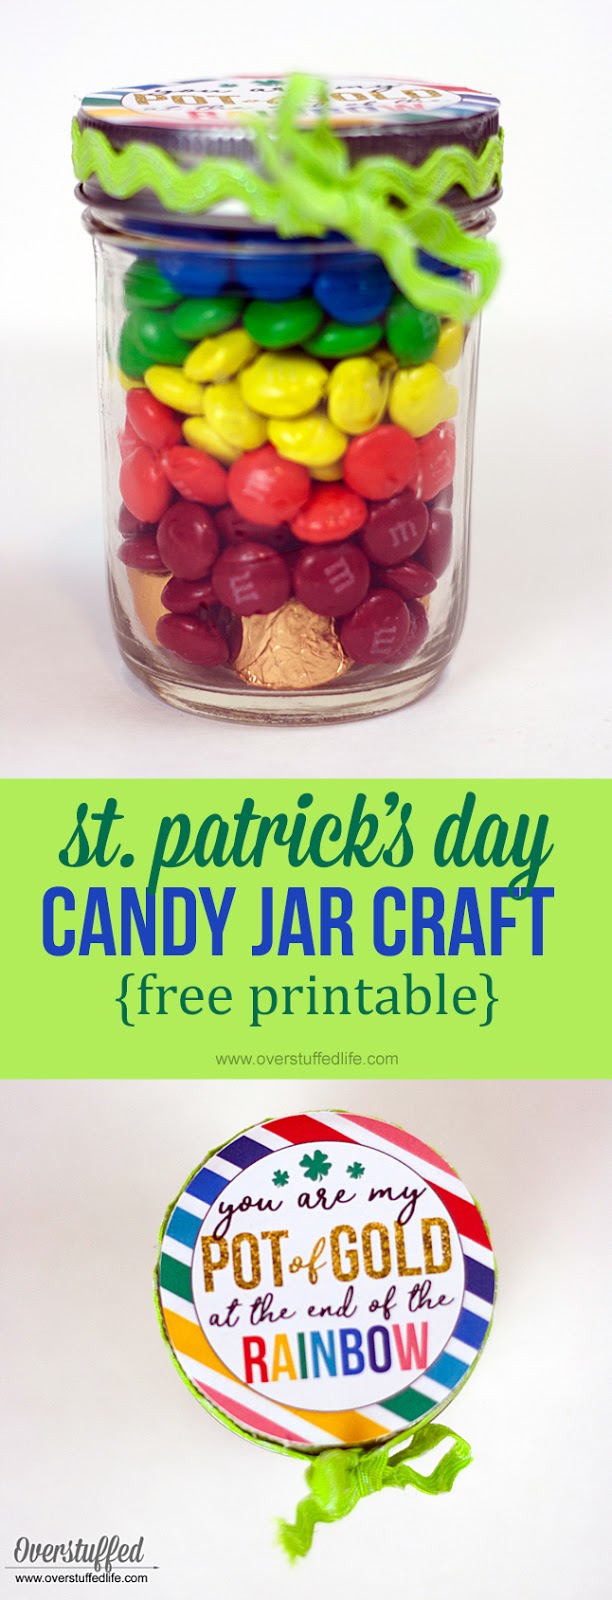 St. Patrick's Day | Pot of Gold | You are my pot of gold at the end of the rainbow | Mason jar craft | candy jar | free printable | free St. Patrick's Day holiday printable | St. Paddy's Day gift idea | St. Patrick's Day craft idea for kids | DIY St. Pat's mason jar craft ideas